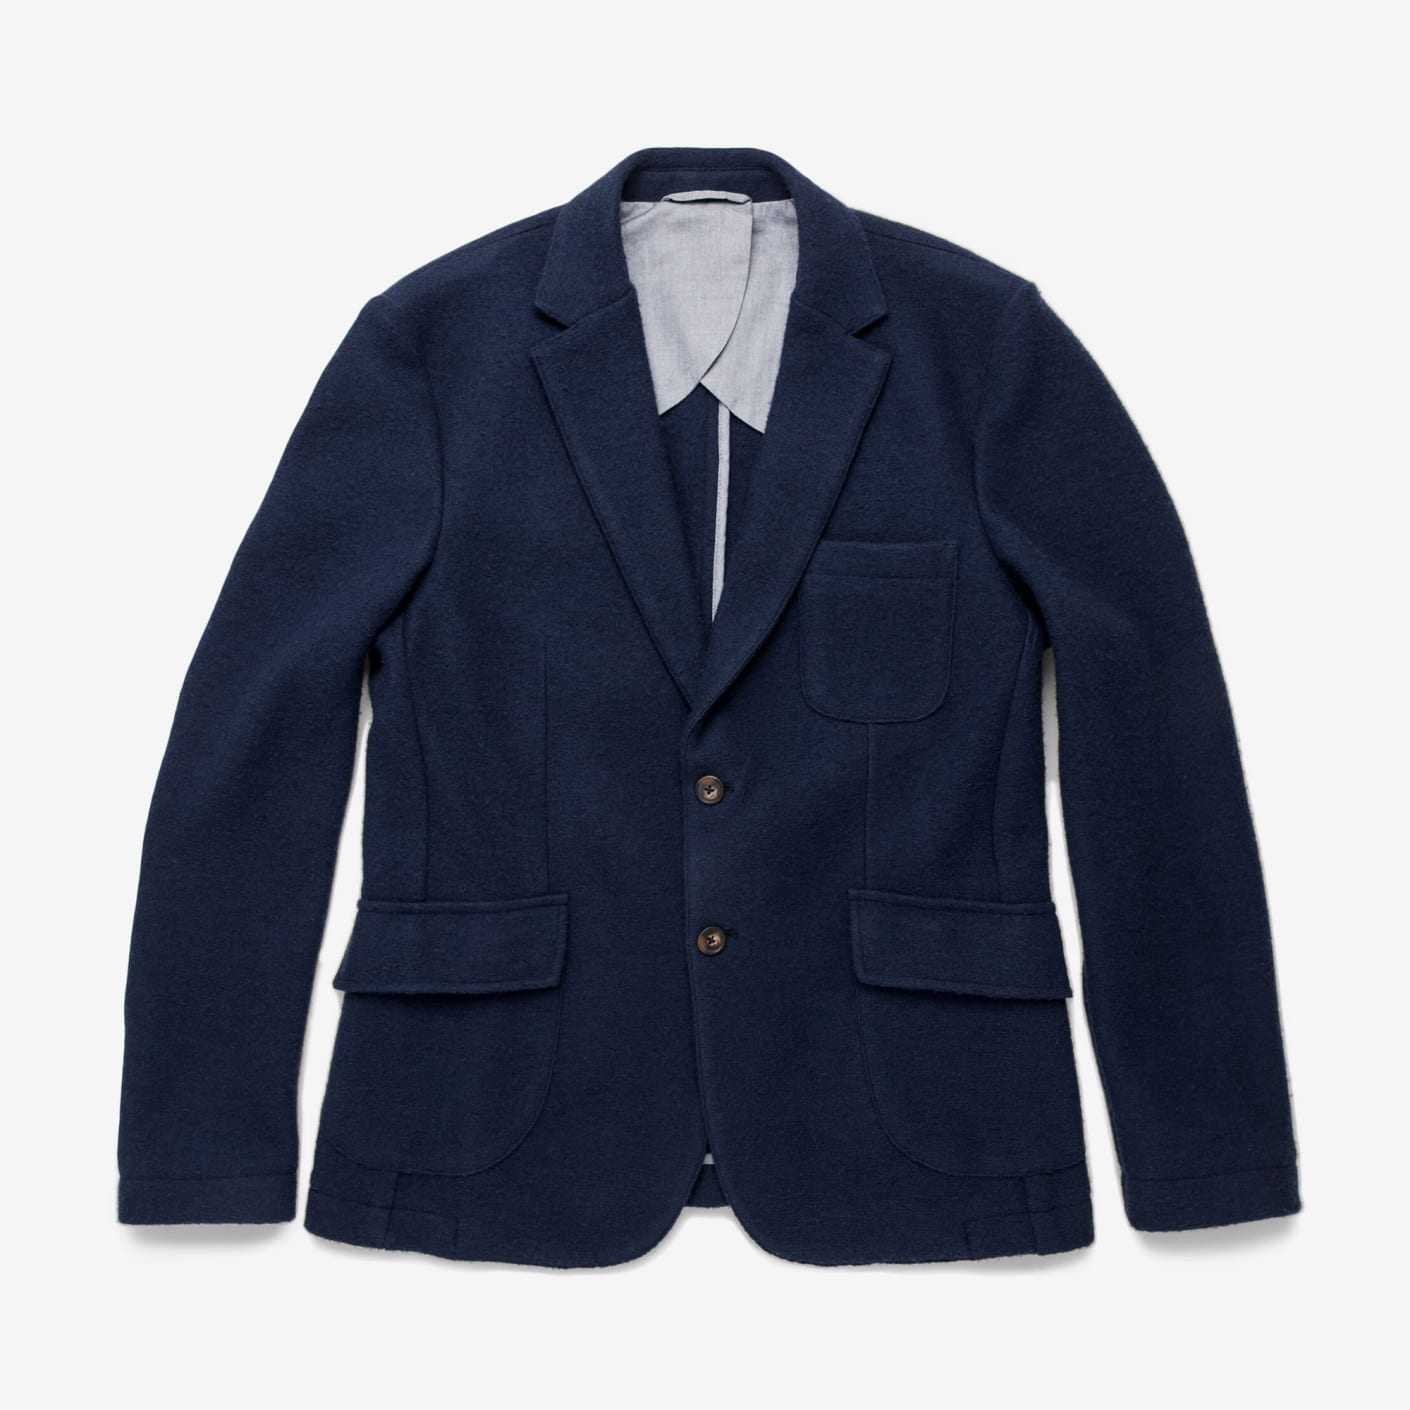 Taylor Stitch The Telegraph Jacket in Navy Boiled Wool | Bespoke Post